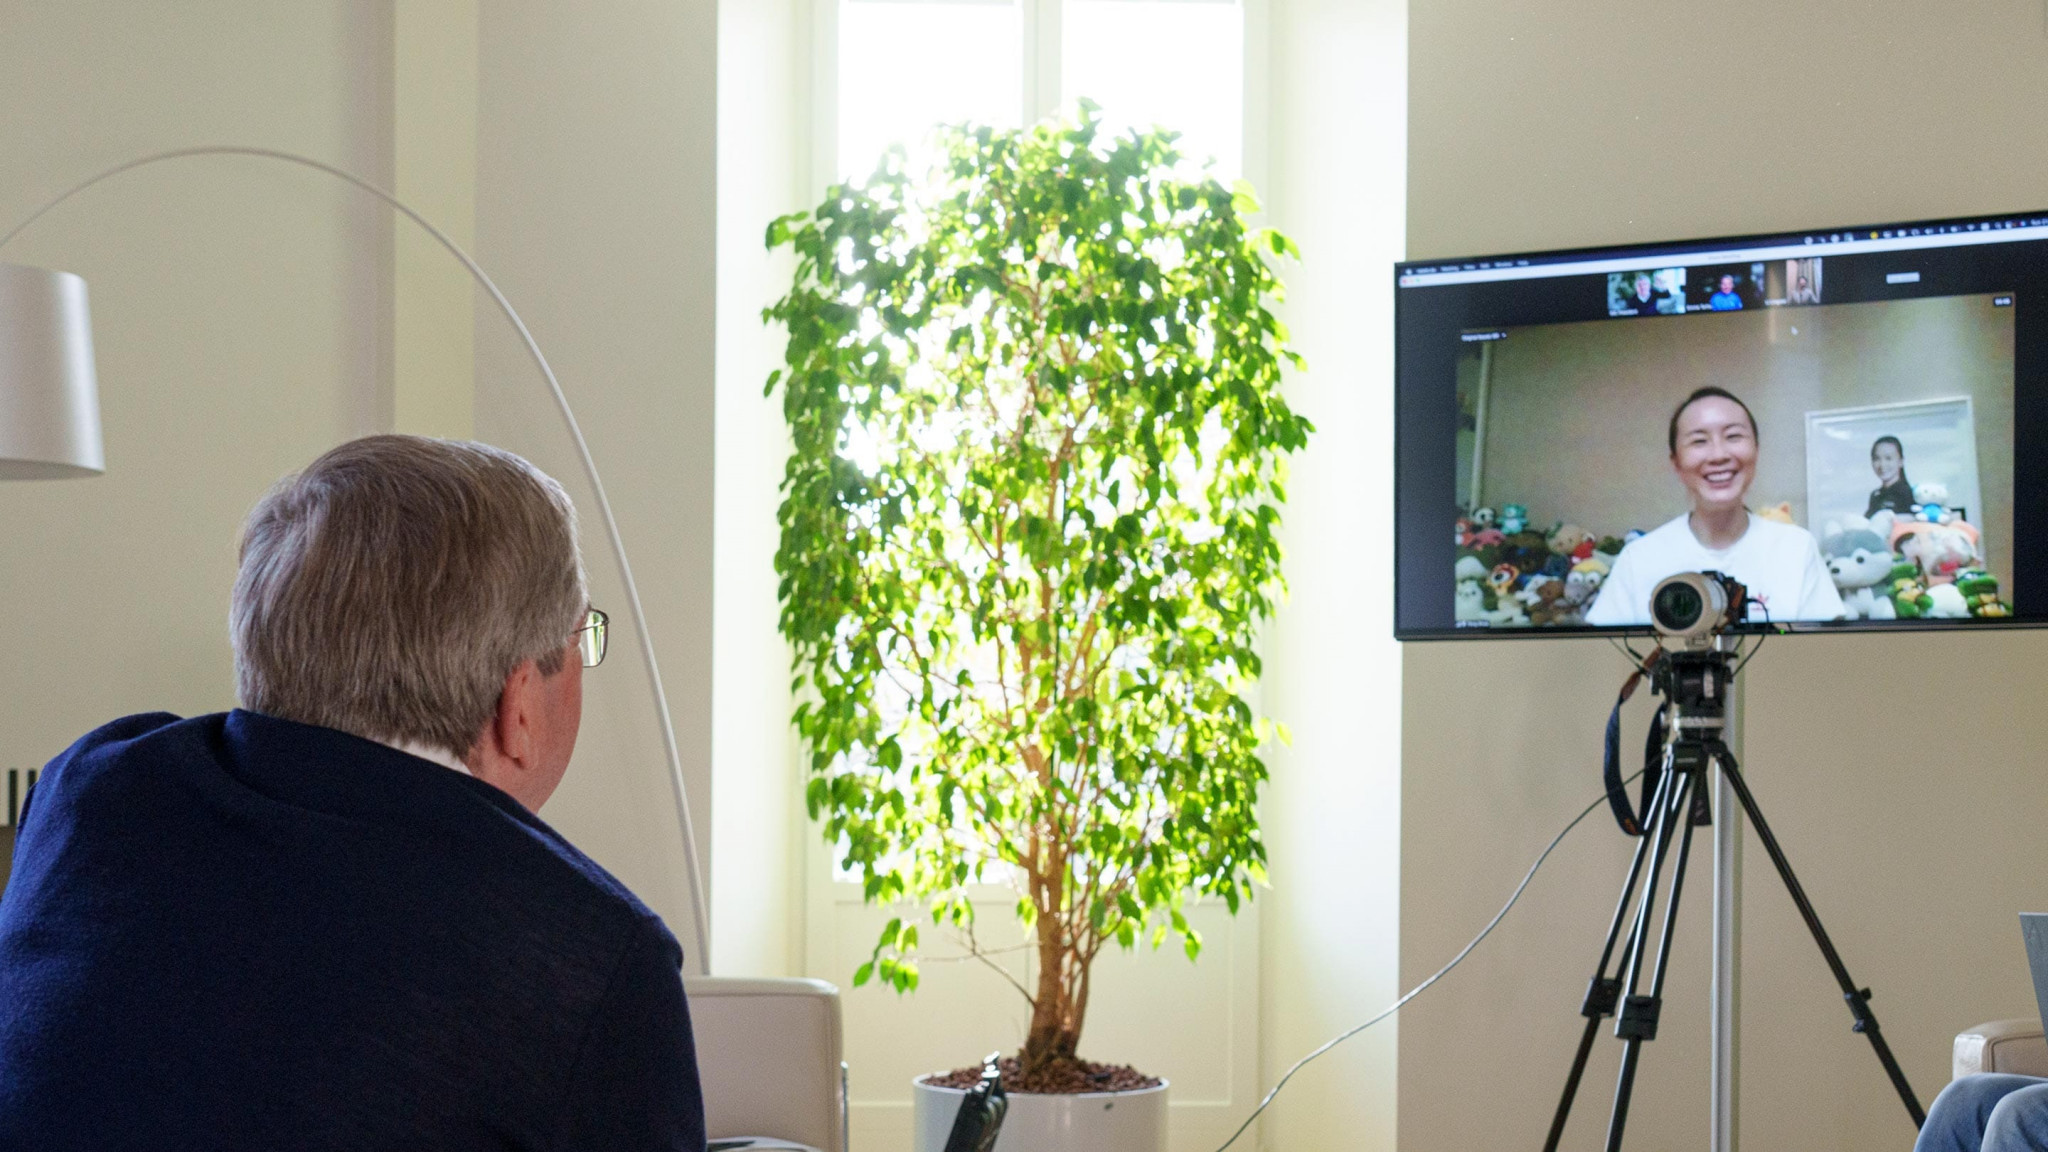 IOC President Thomas Bach held a 30-minute video call with Peng Shuai over the weekend ©IOC